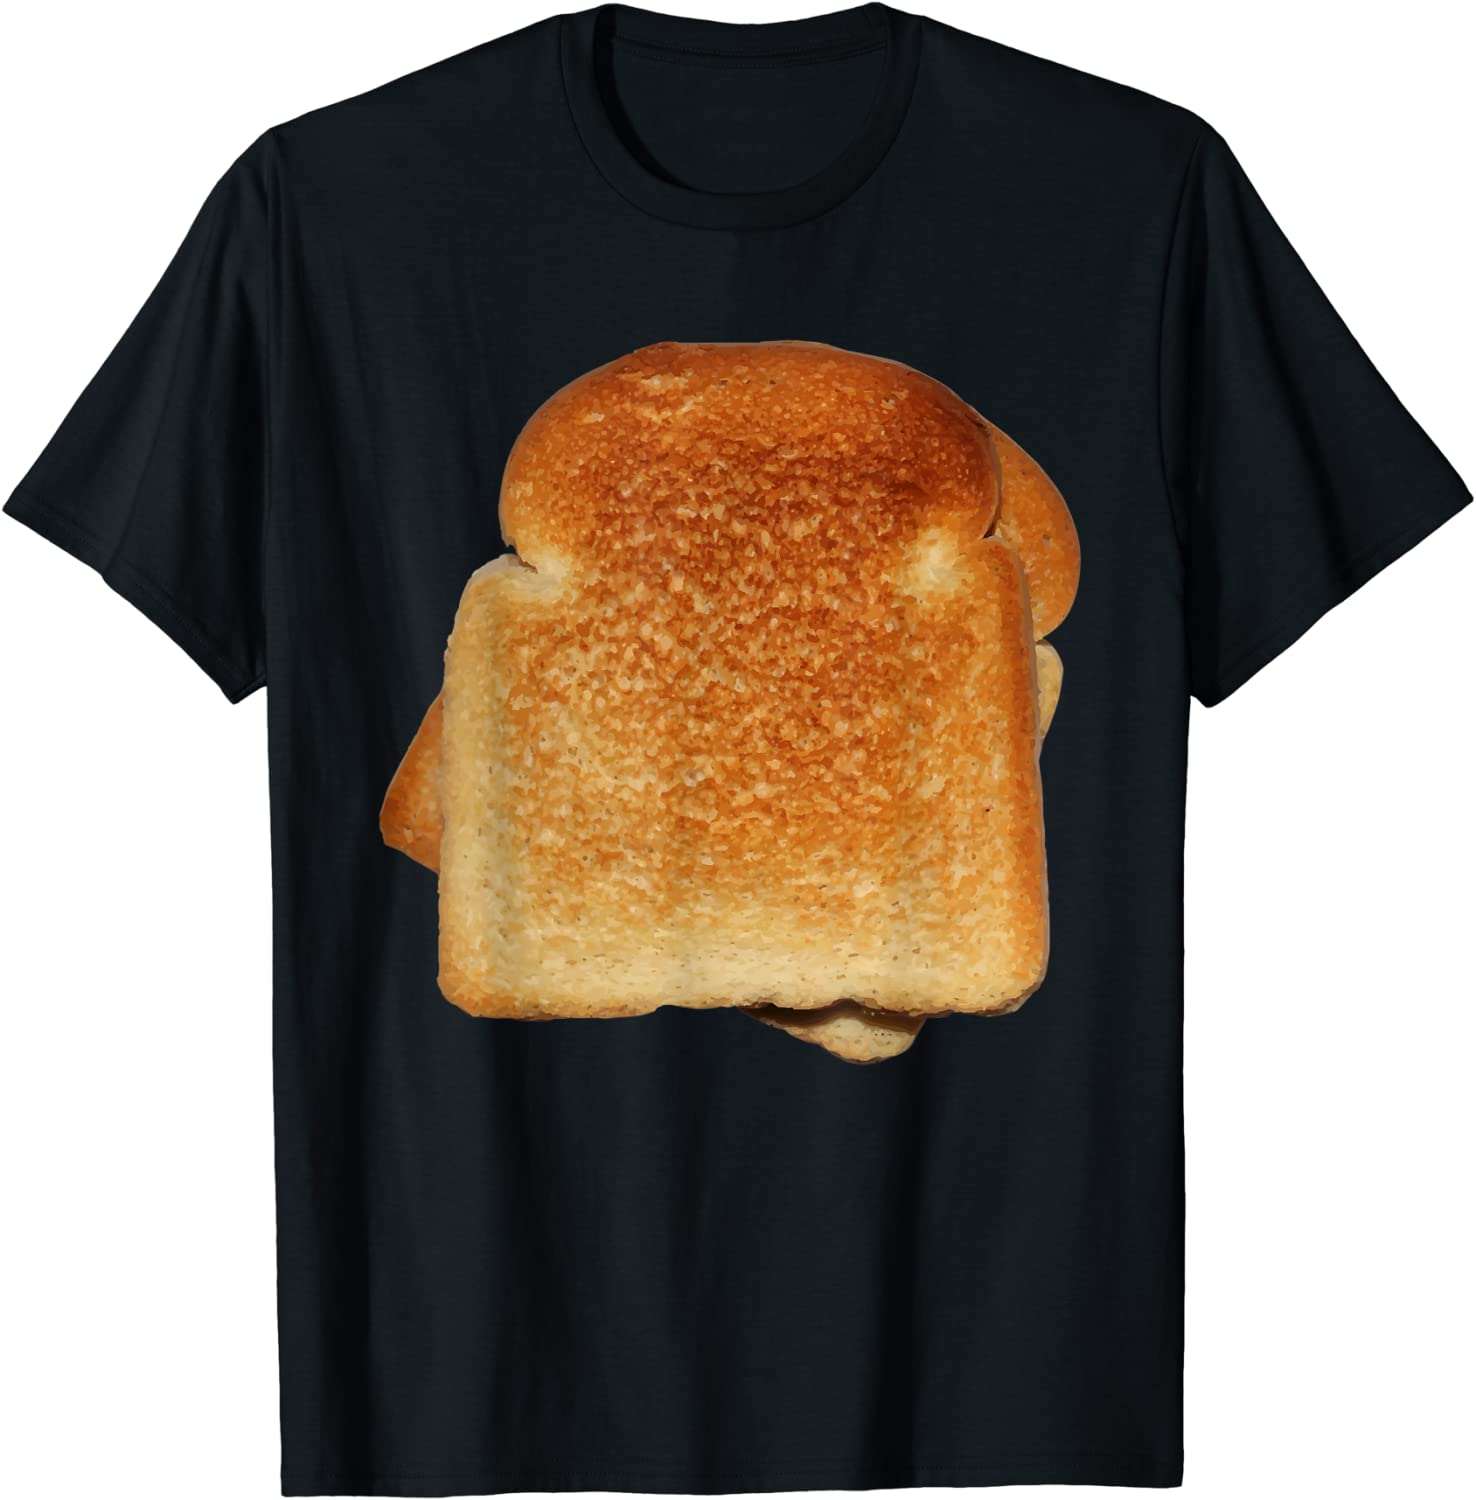 Toast or Bread Graphic T-Shirt